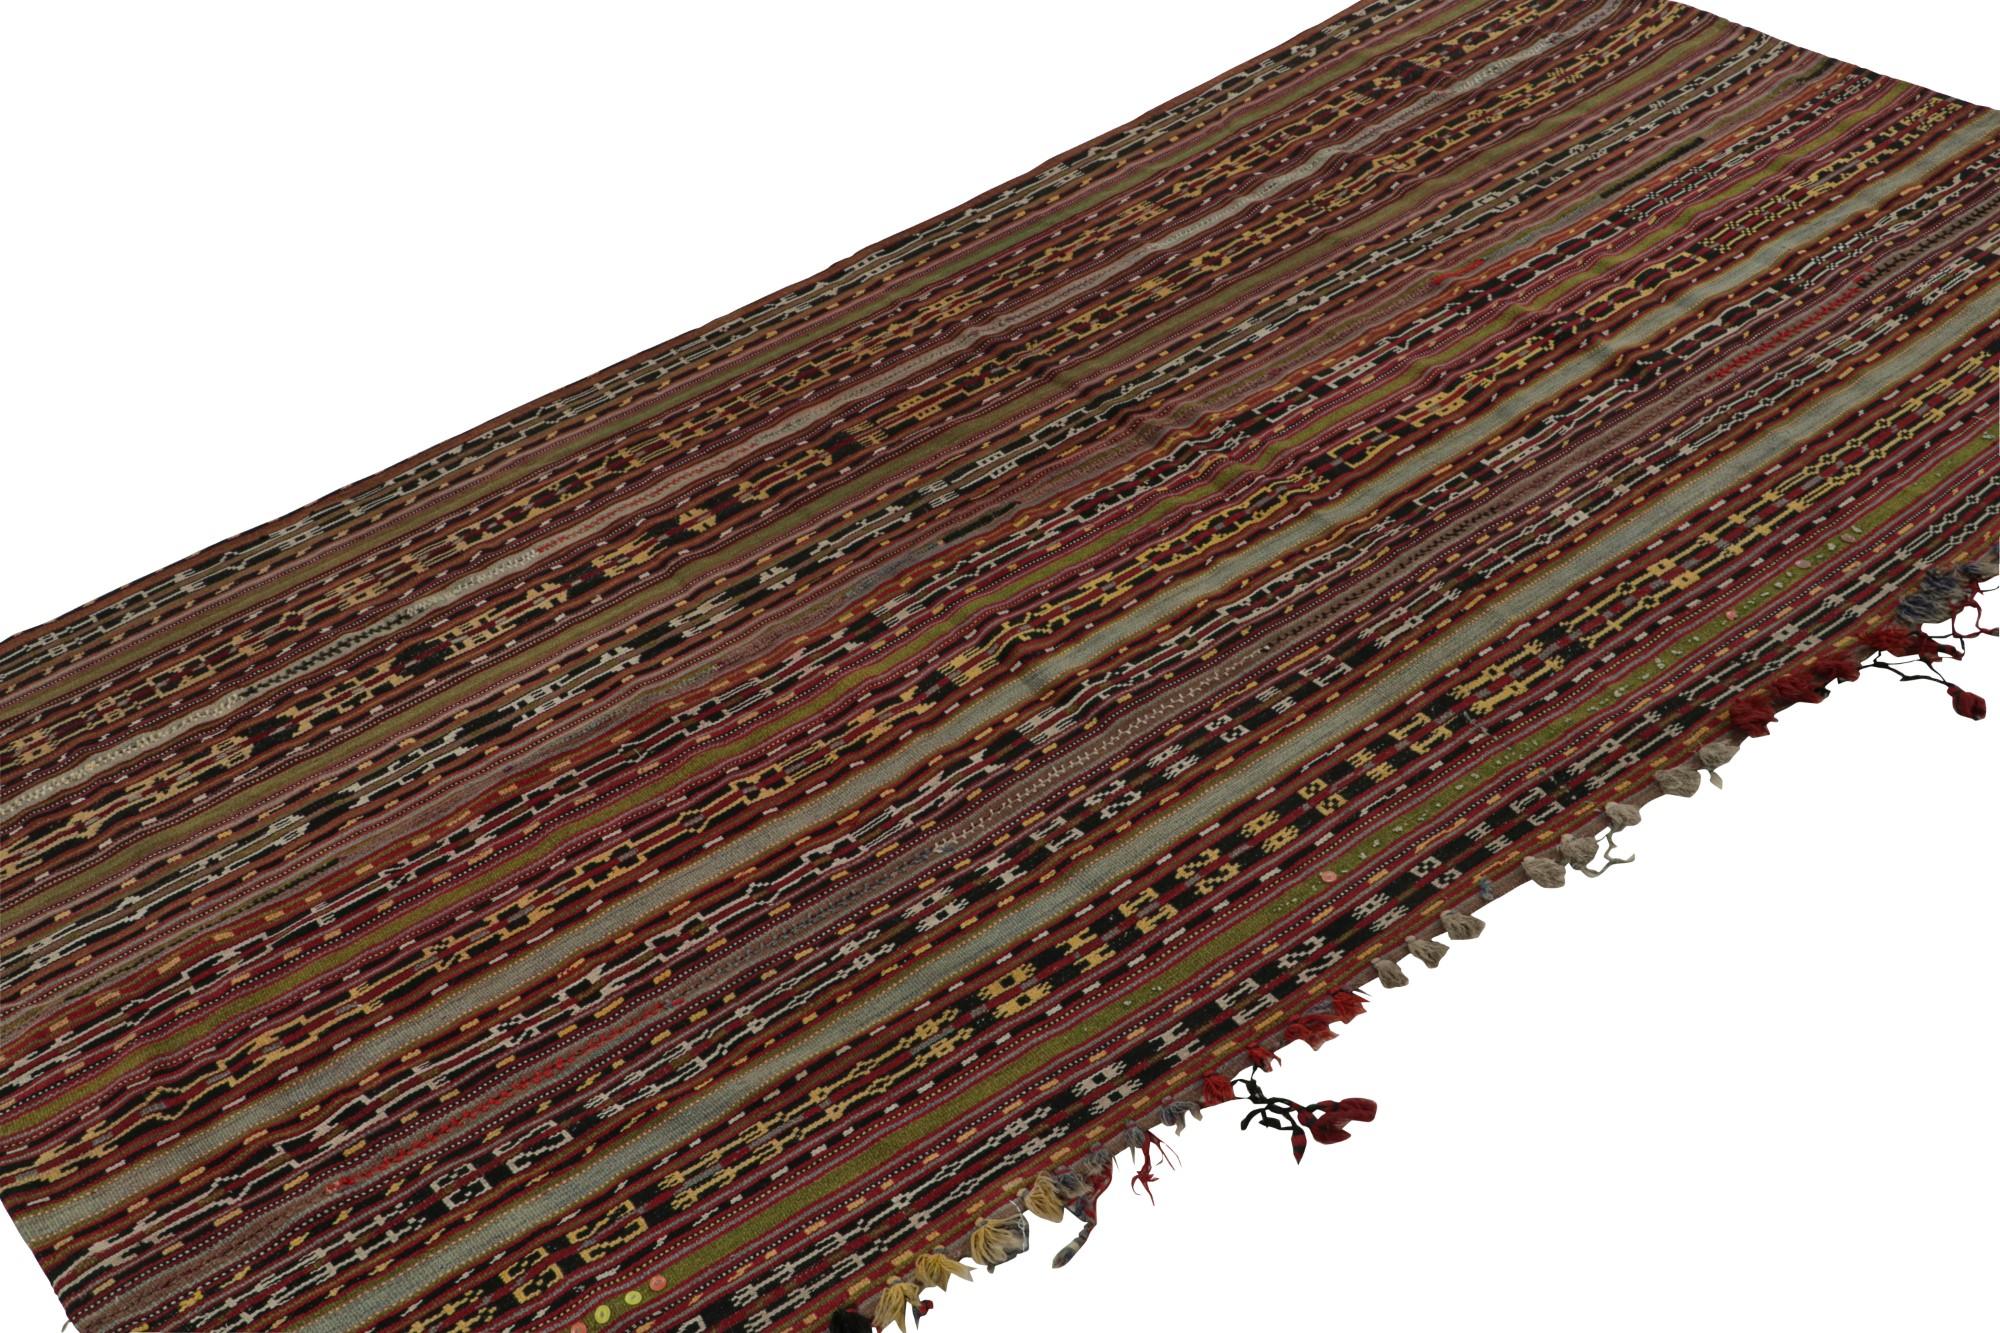 Handwoven in wool, circa 1950-1960, this 5x7 vintage Afghan tribal kilim rug, is a vibrant work of folk art as much as an eccentric handmade flatweave, full of culture and distinction. 

On the Design: 

Admirers of the craft may admire the